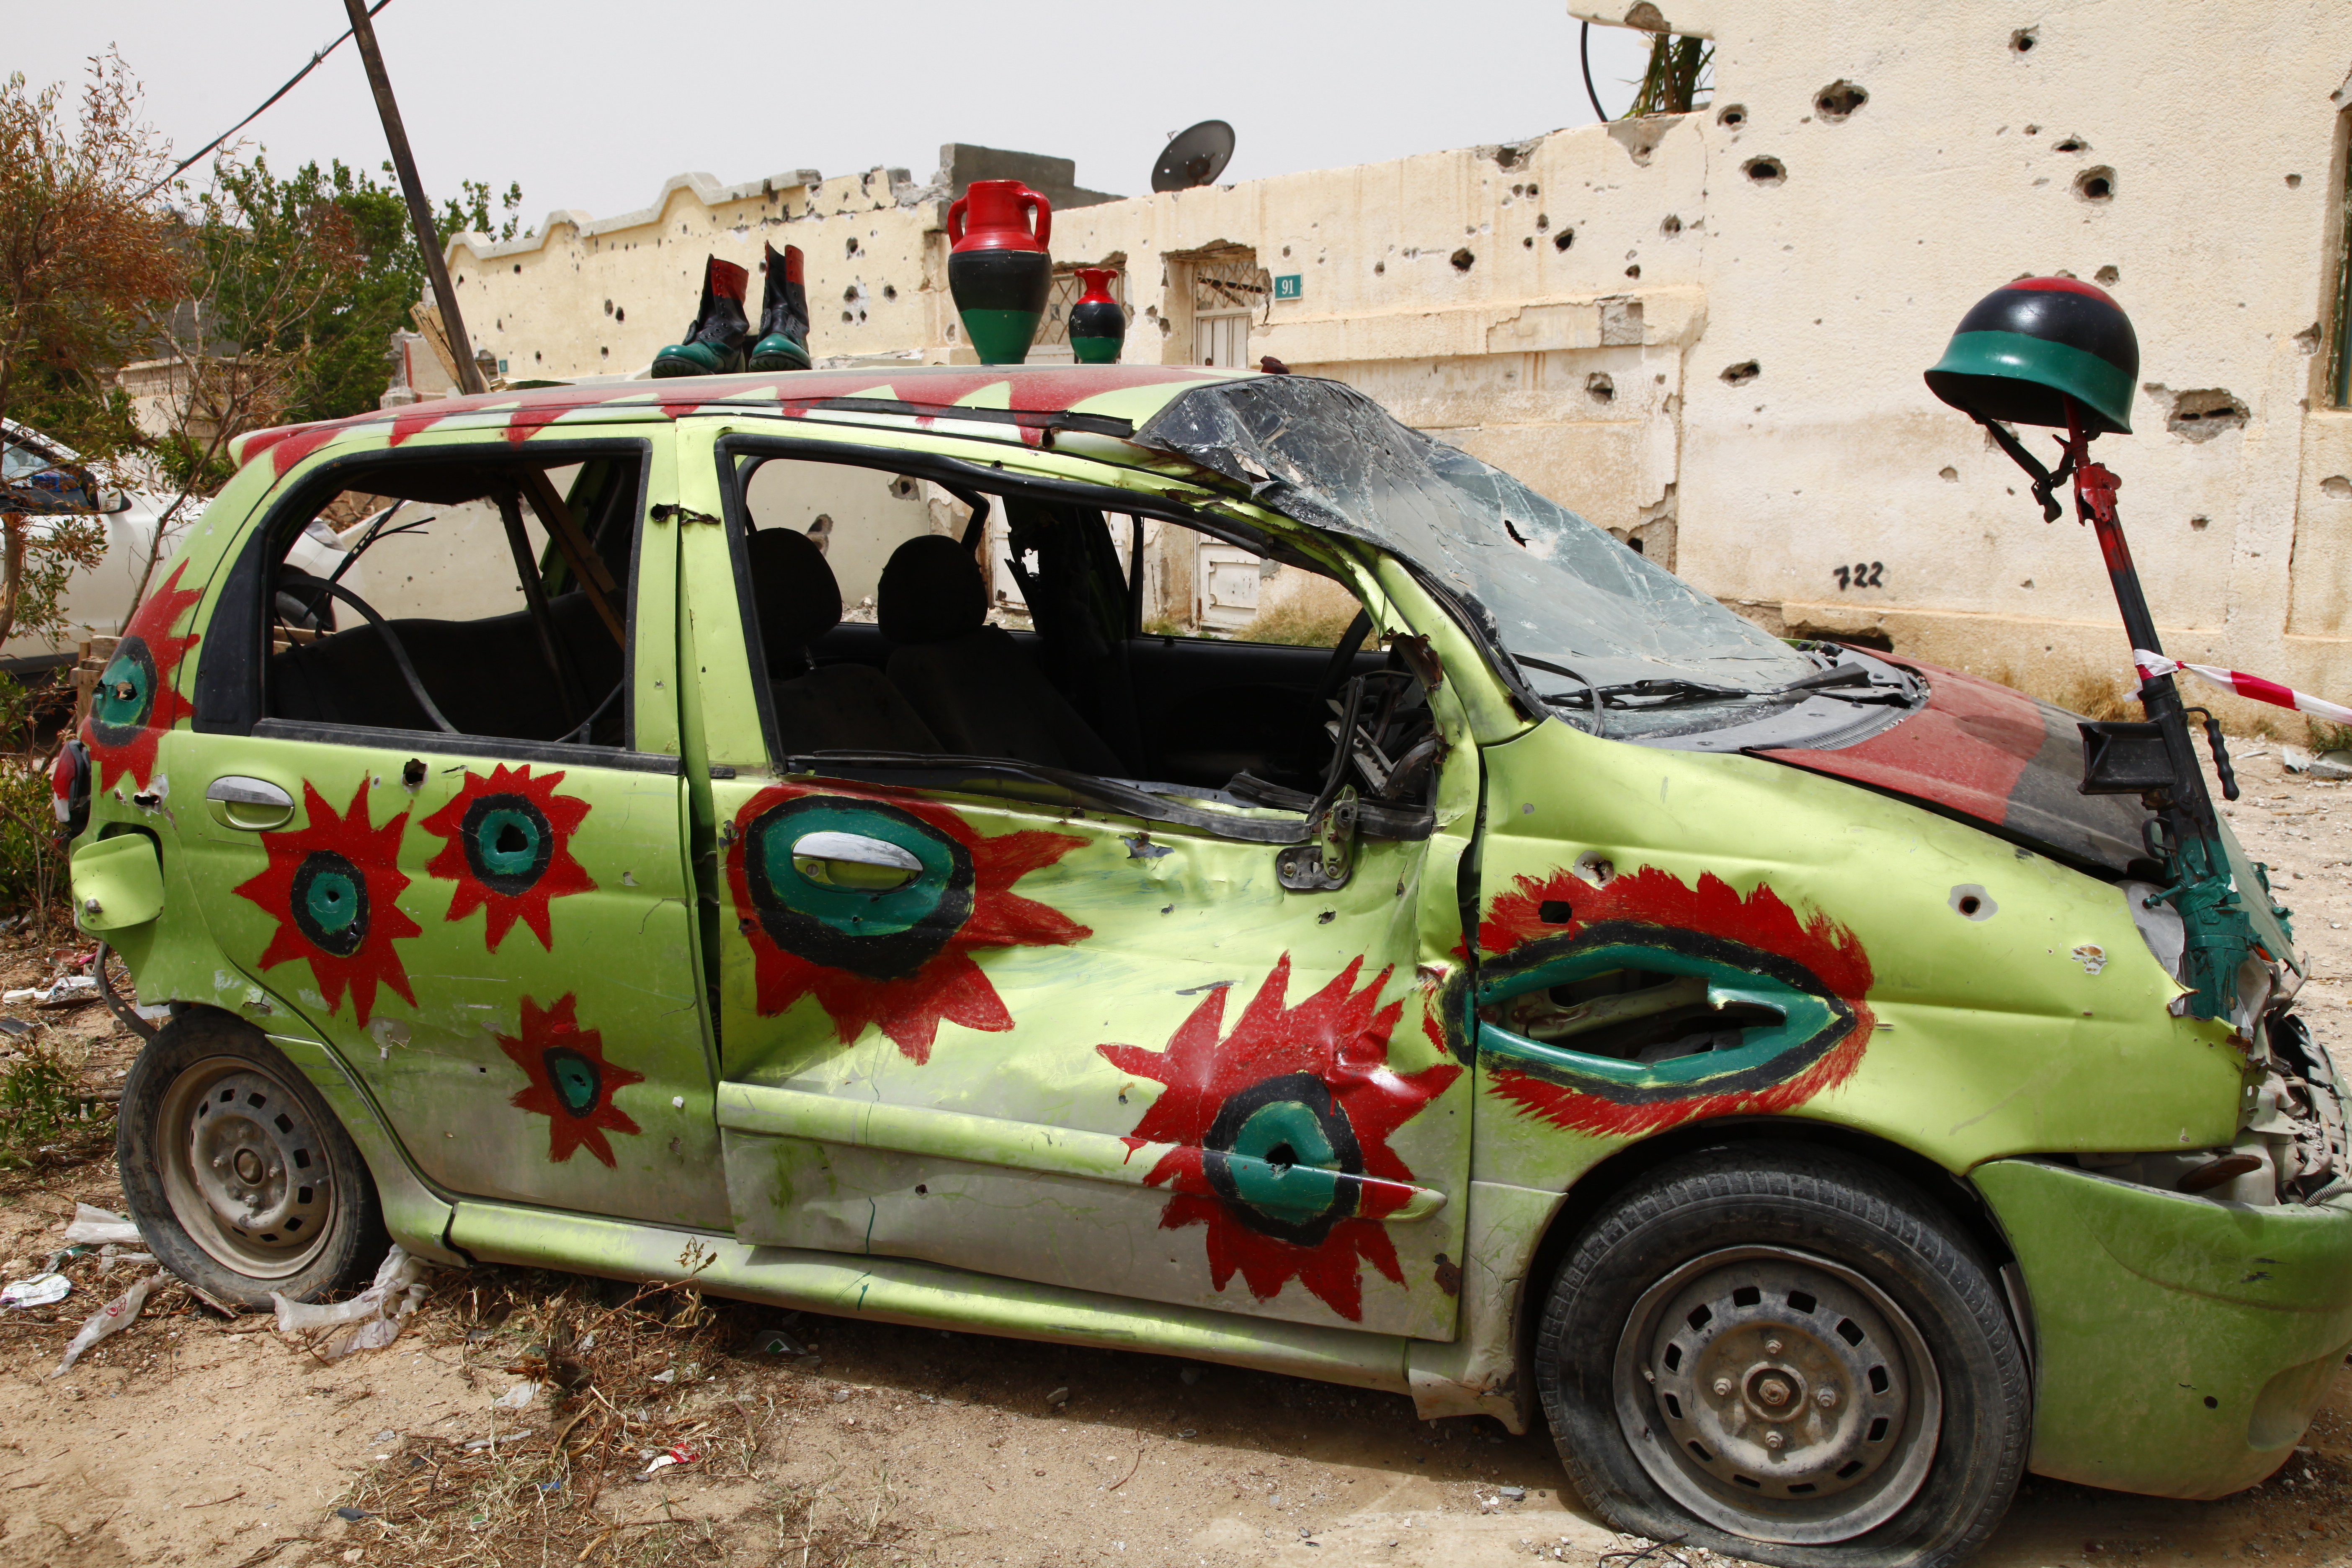 A war car painted with colours of the Libyan flag, Misrata, 2011 Credit: Flickr/ mojomogwai